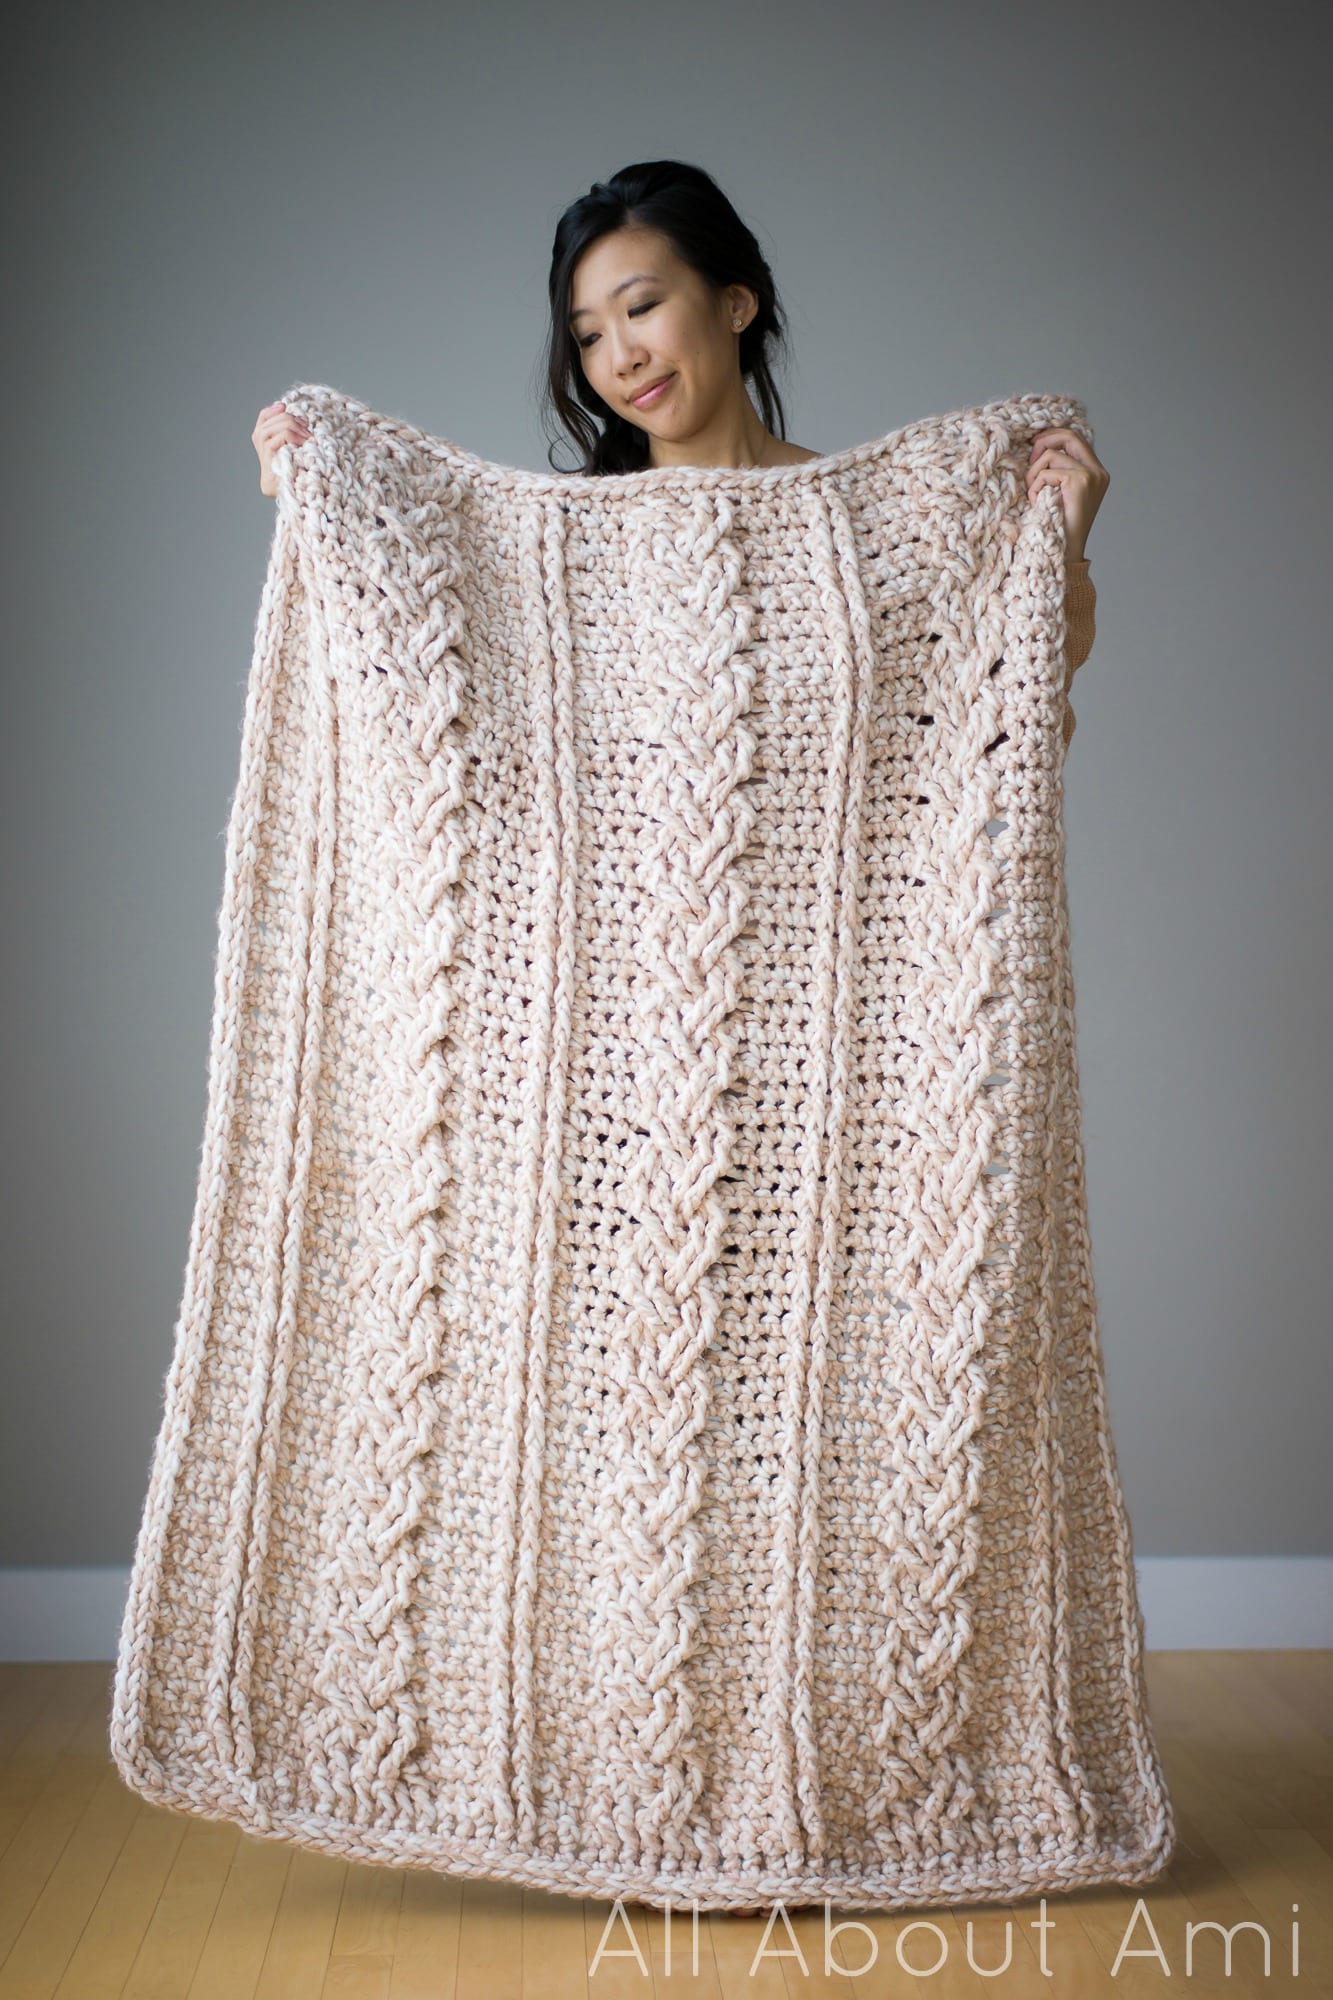 Finger Knitting: Create a chunky knit blanket using only your hands, Jessica Stiel